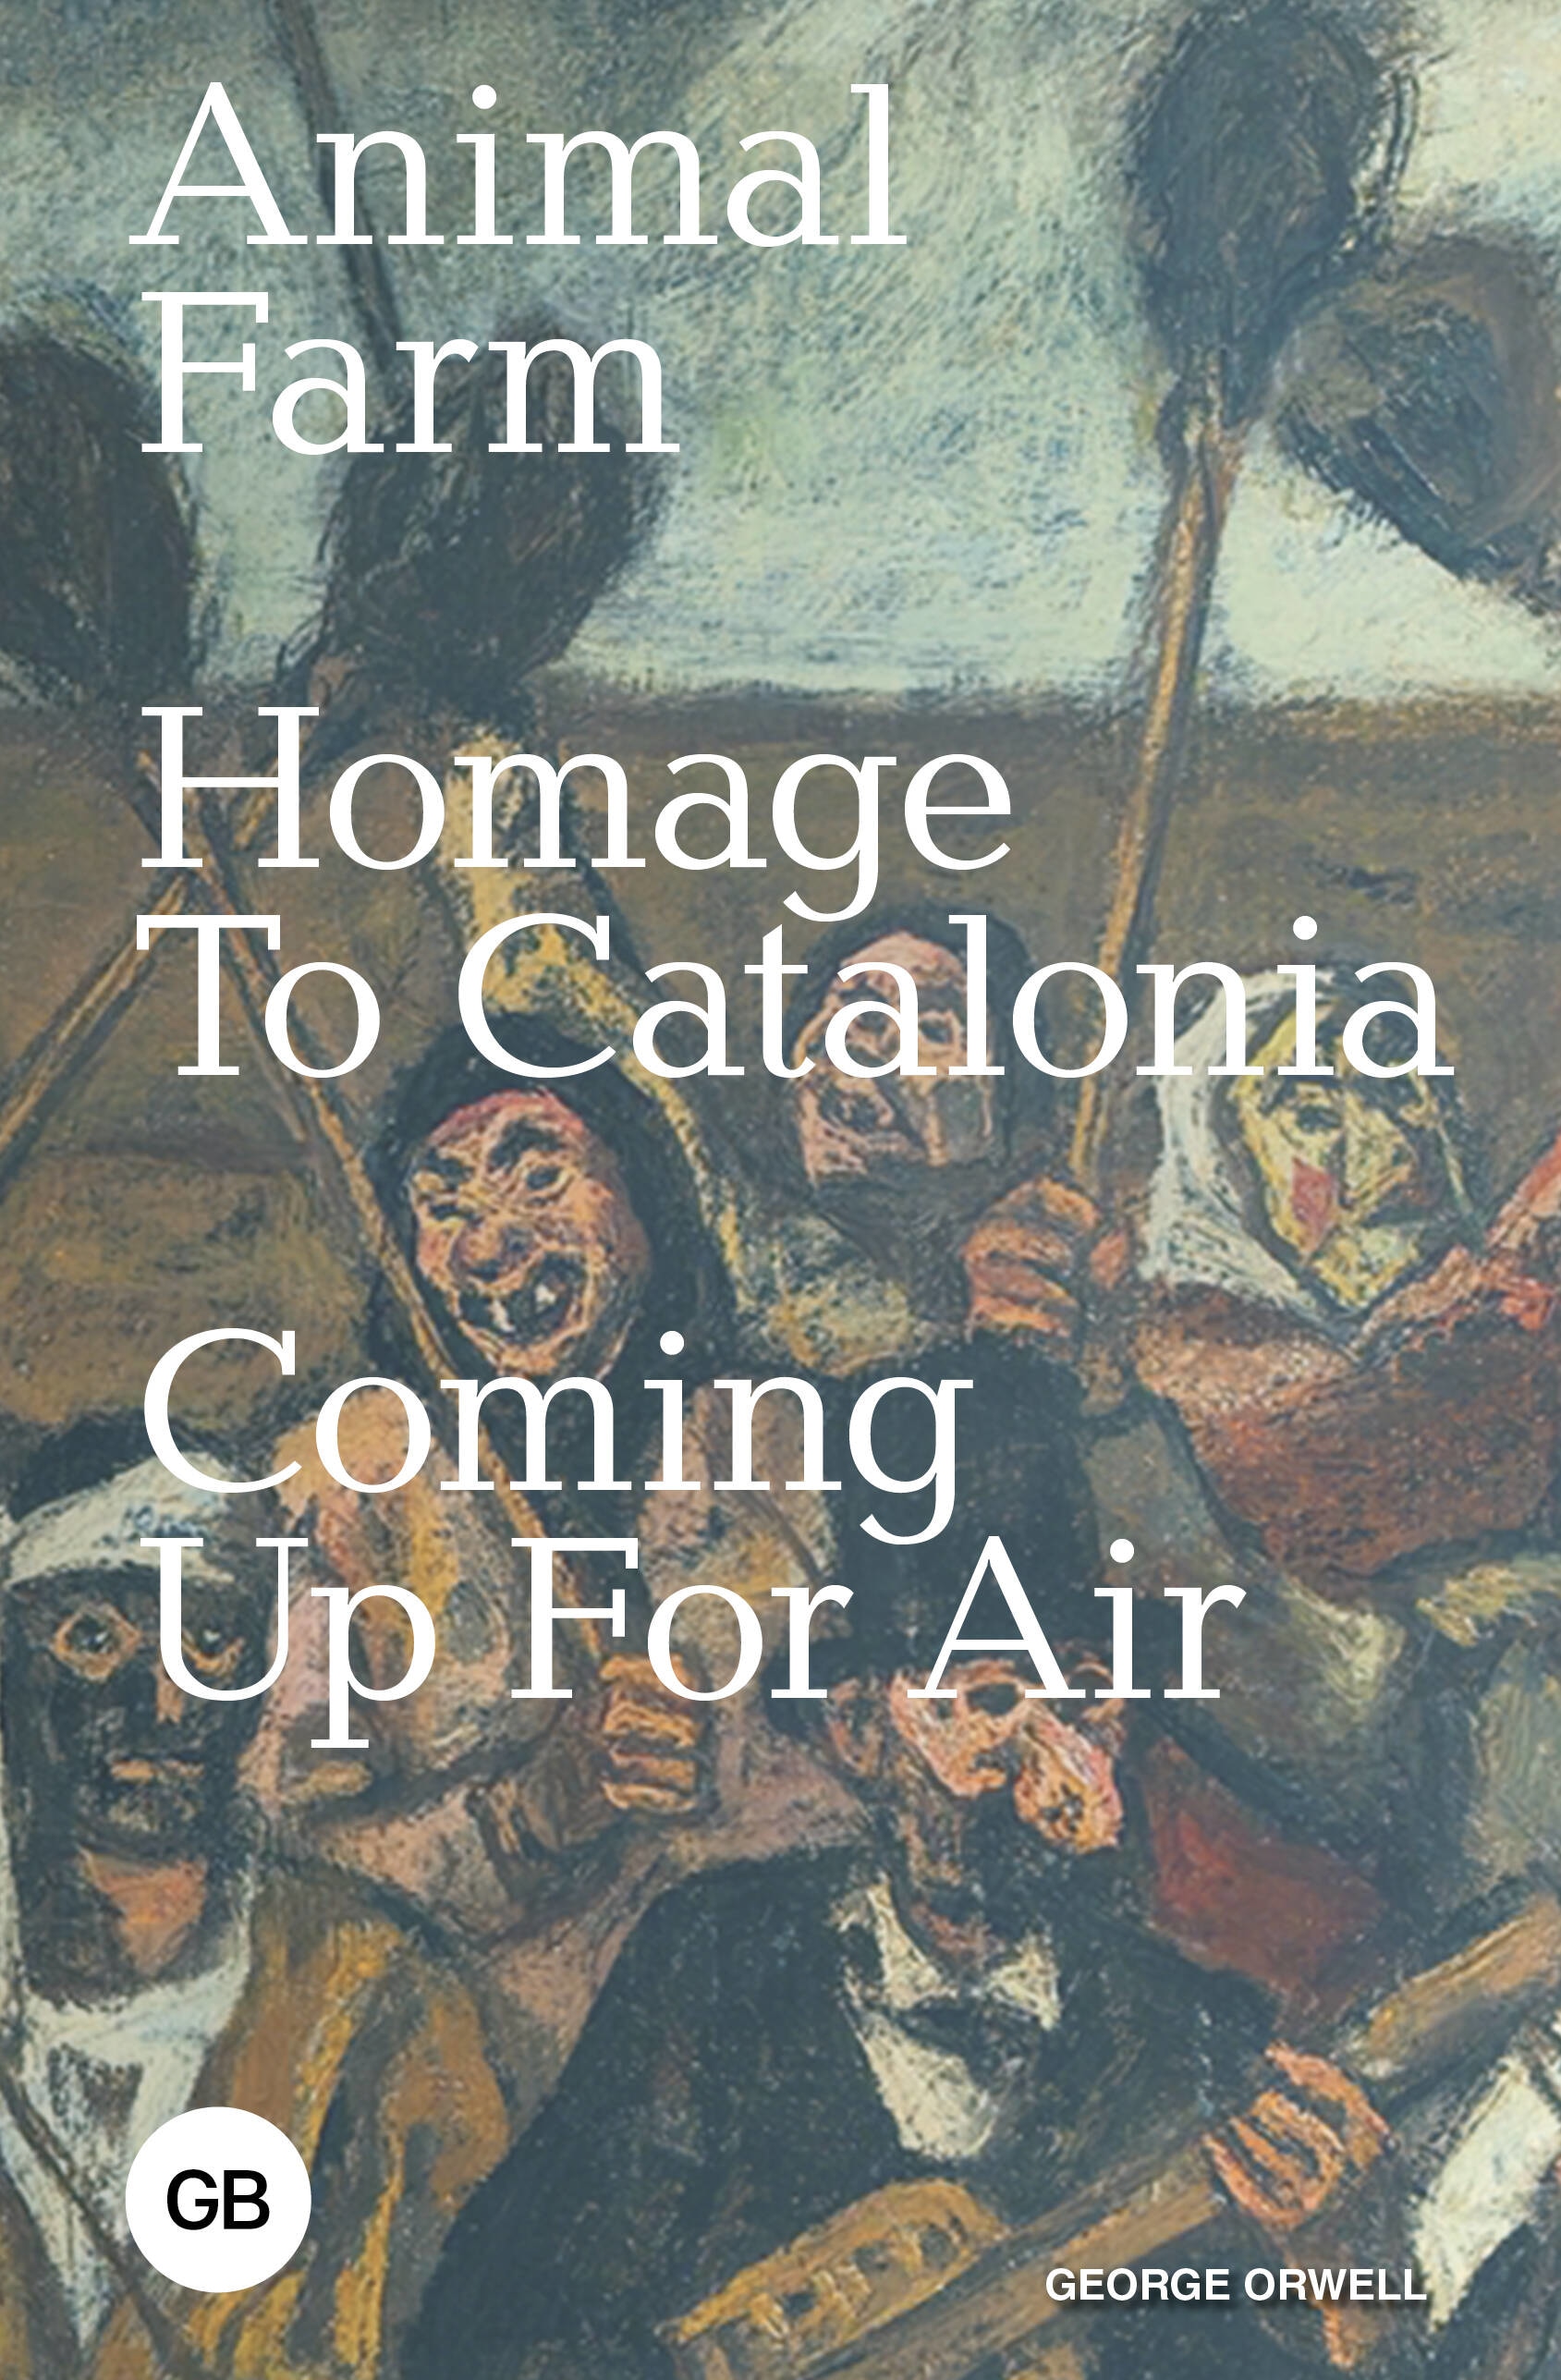 Animal Farm; Homage to Catalonia; Coming Up for Air